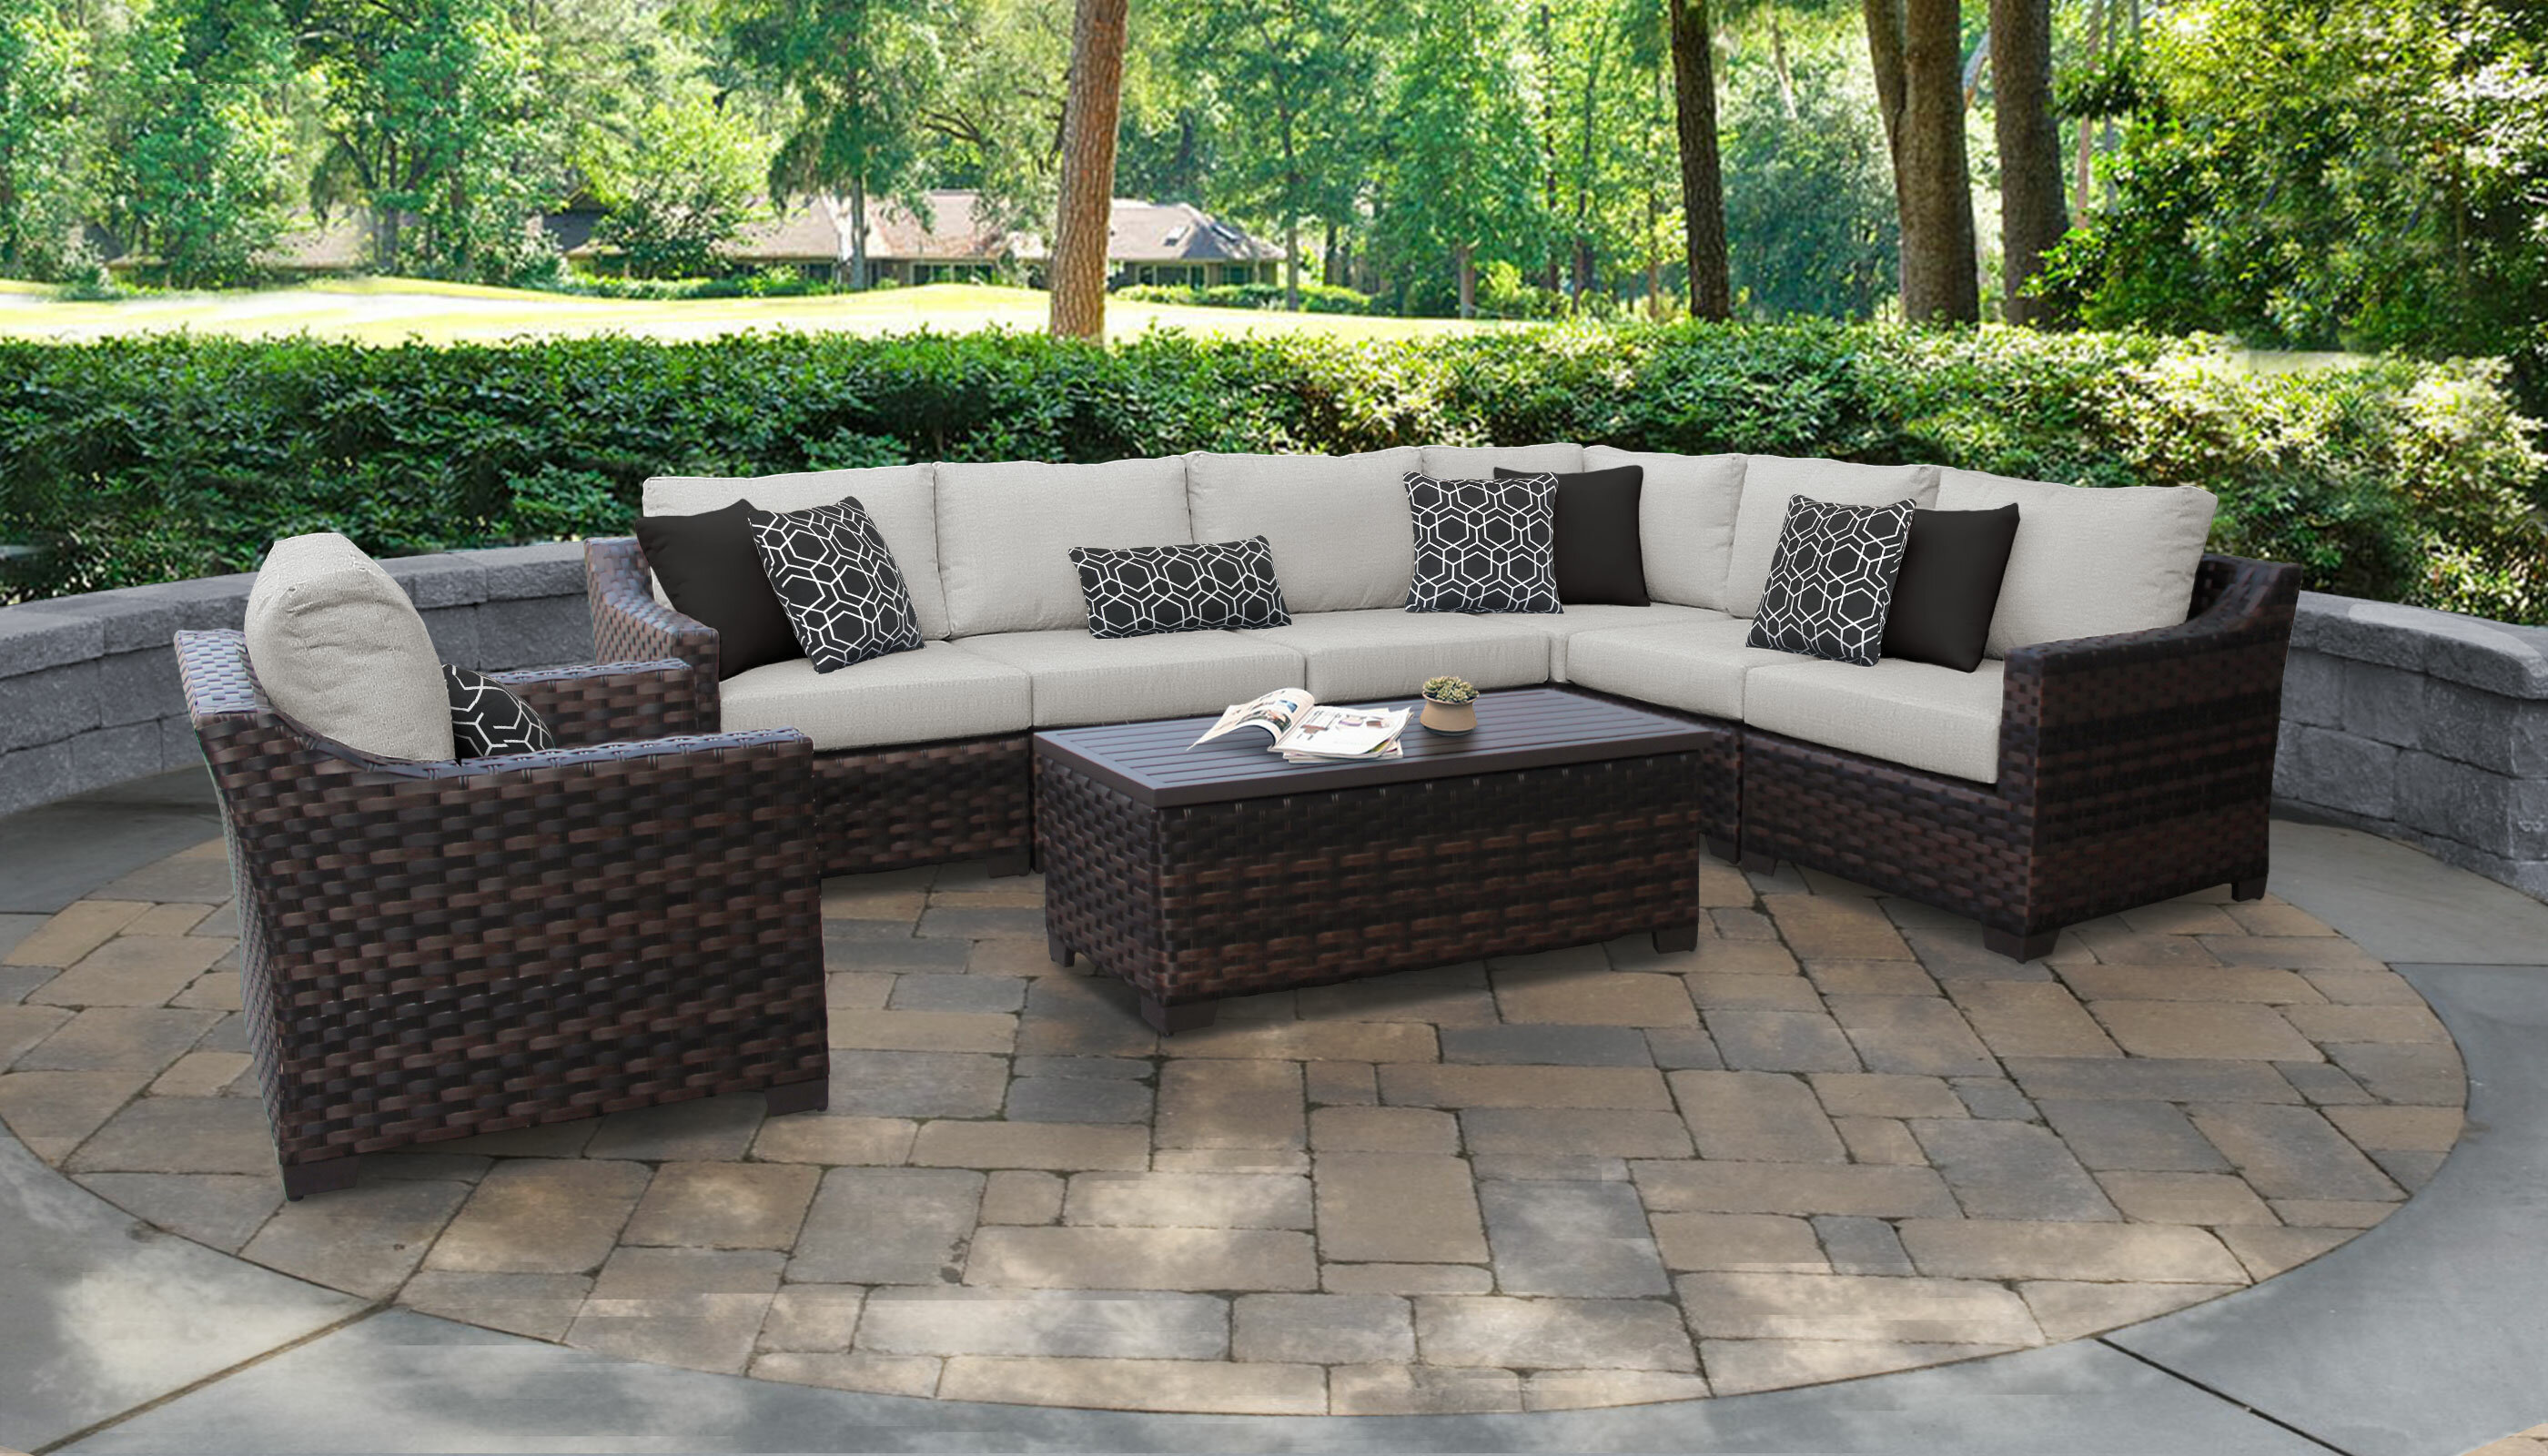 Tk Classics Kathy Ireland Homes And Gardens River Brook 8 Piece Outdoor